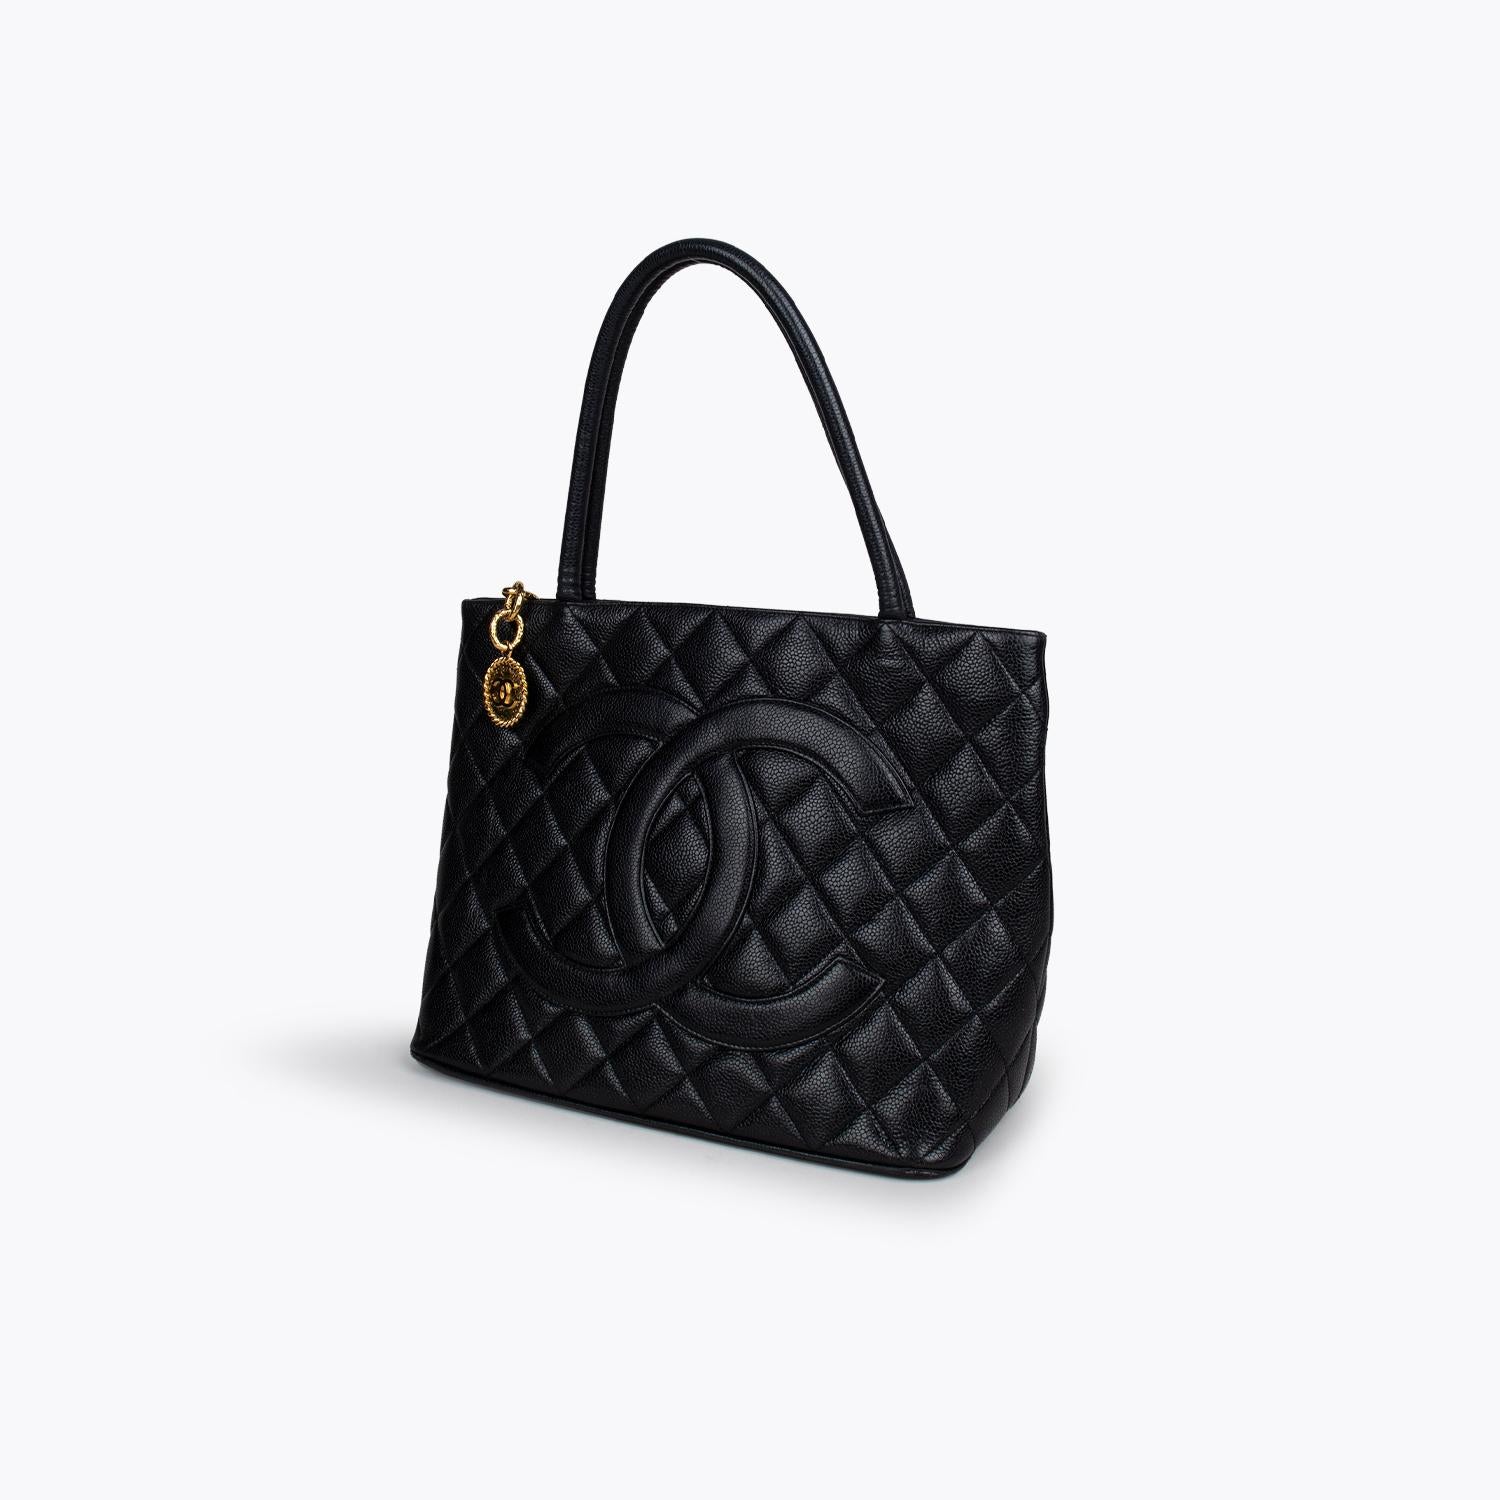 Black quilted Caviar leather Chanel Medallion tote with

- Gold-tone hardware
- Dual rolled shoulder straps
- Patch pocket at exterior back
- Tonal leather interior, dual pockets at interior wall; one with zip closure and zip closure at top